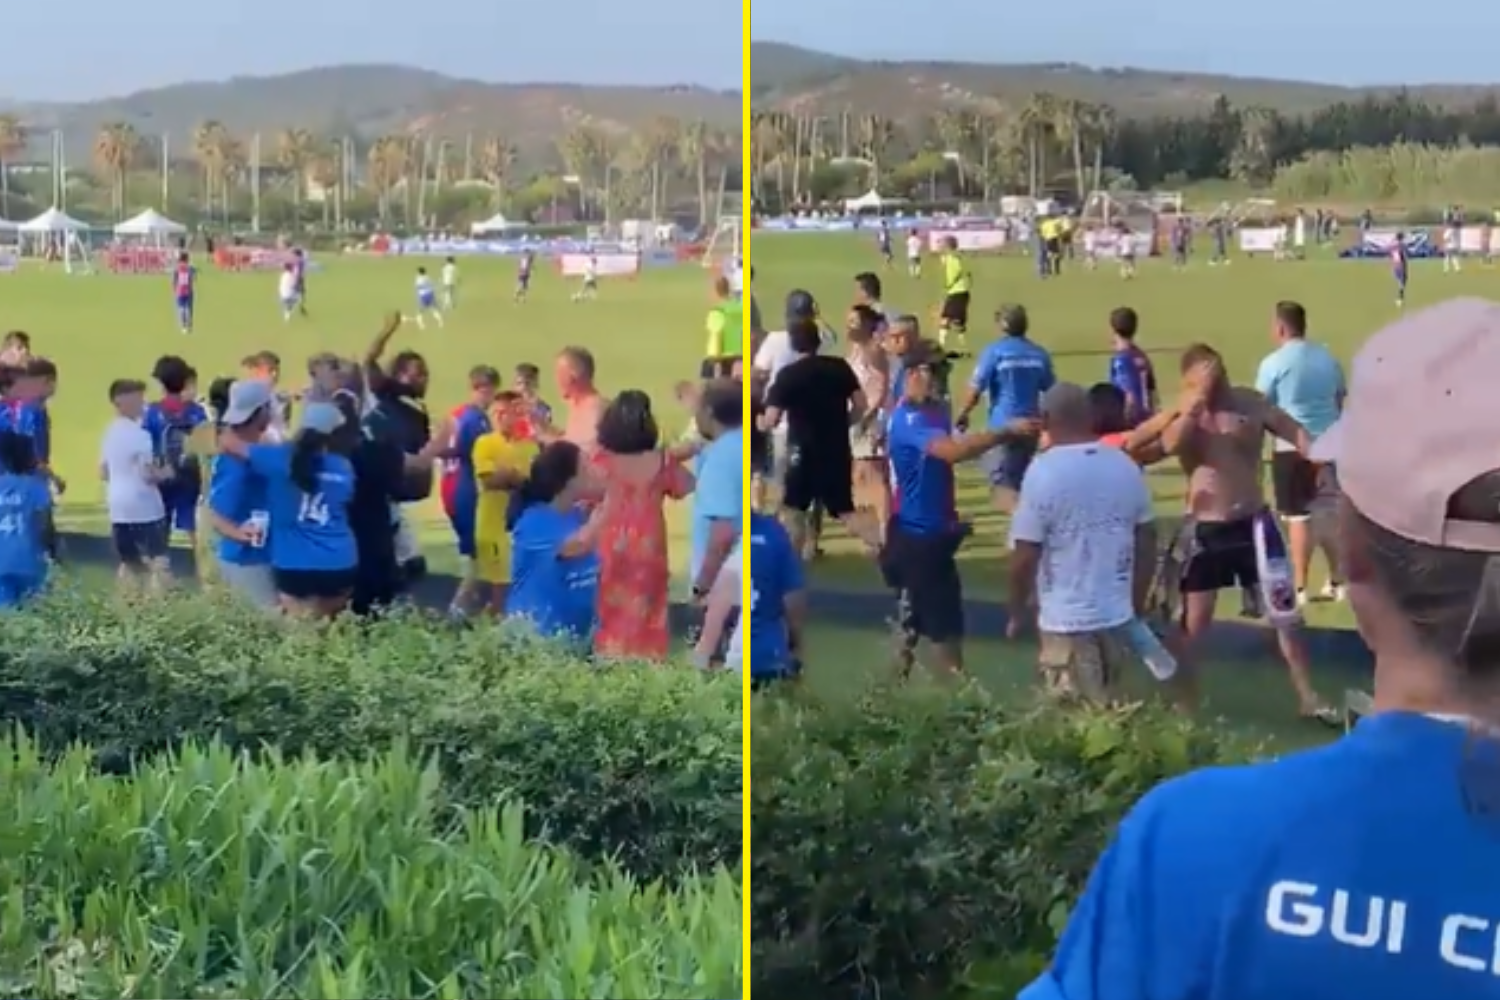 Father tries to stab another dad in shocking scenes at international youth game in Spain